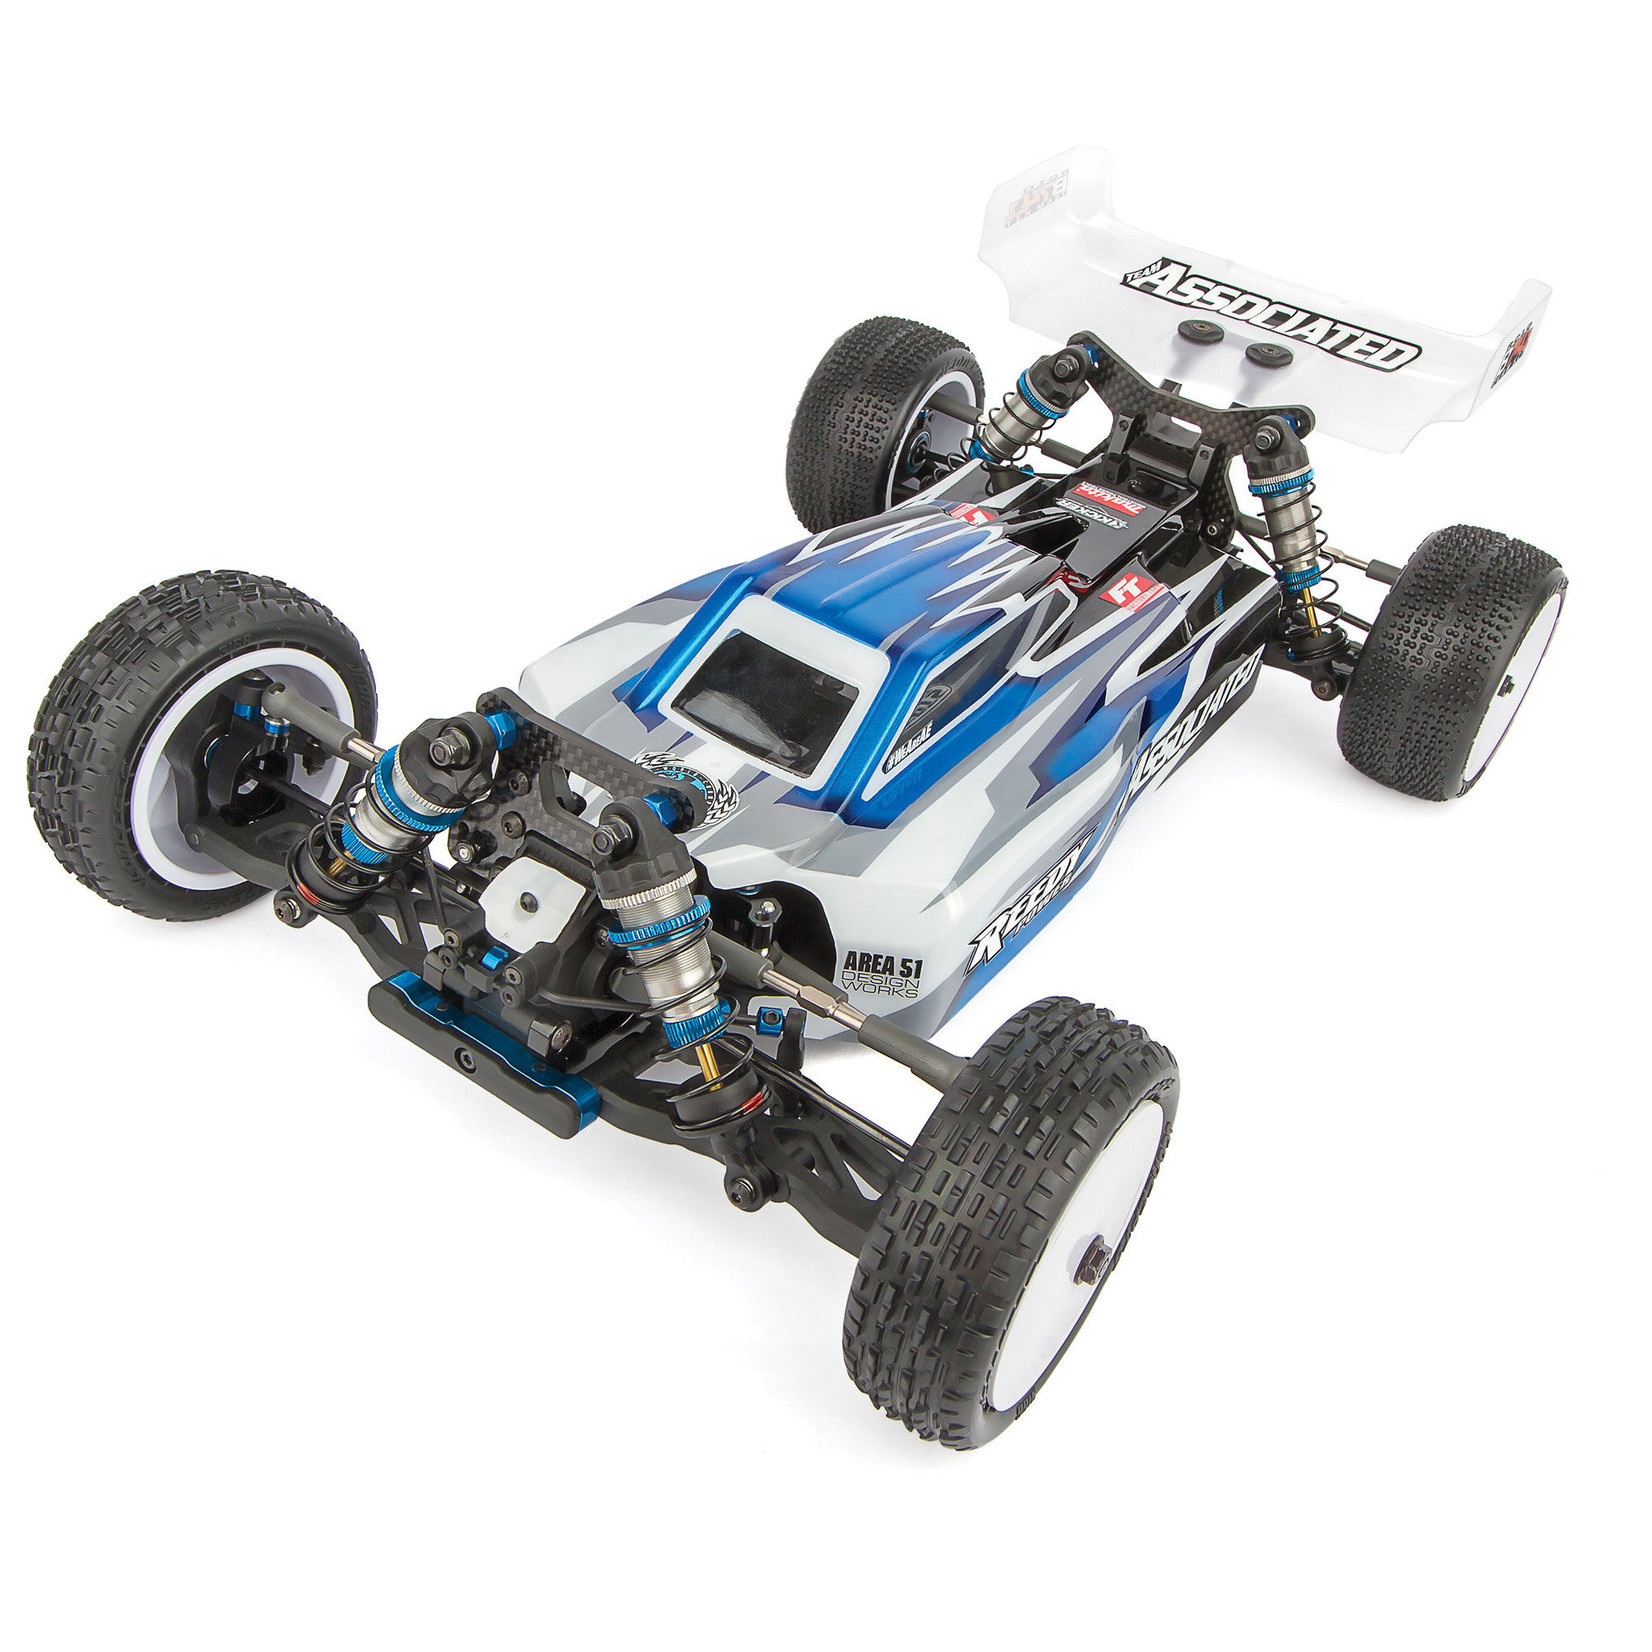 Team Associated 1/10 RC10B74.1 Electric Team 4WD Buggy Kit